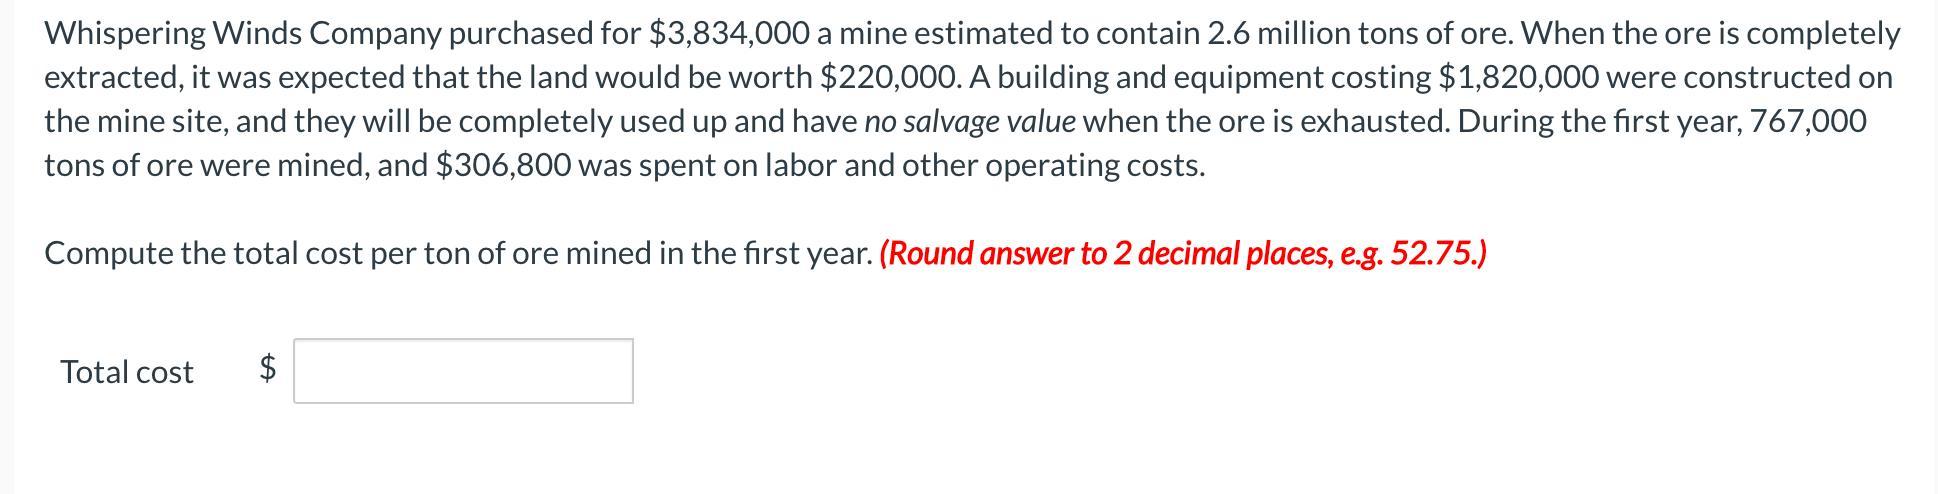 Whispering Winds Company purchased for ( $ 3,834,000 ) a mine estimated to contain ( 2.6 ) million tons of ore. When the